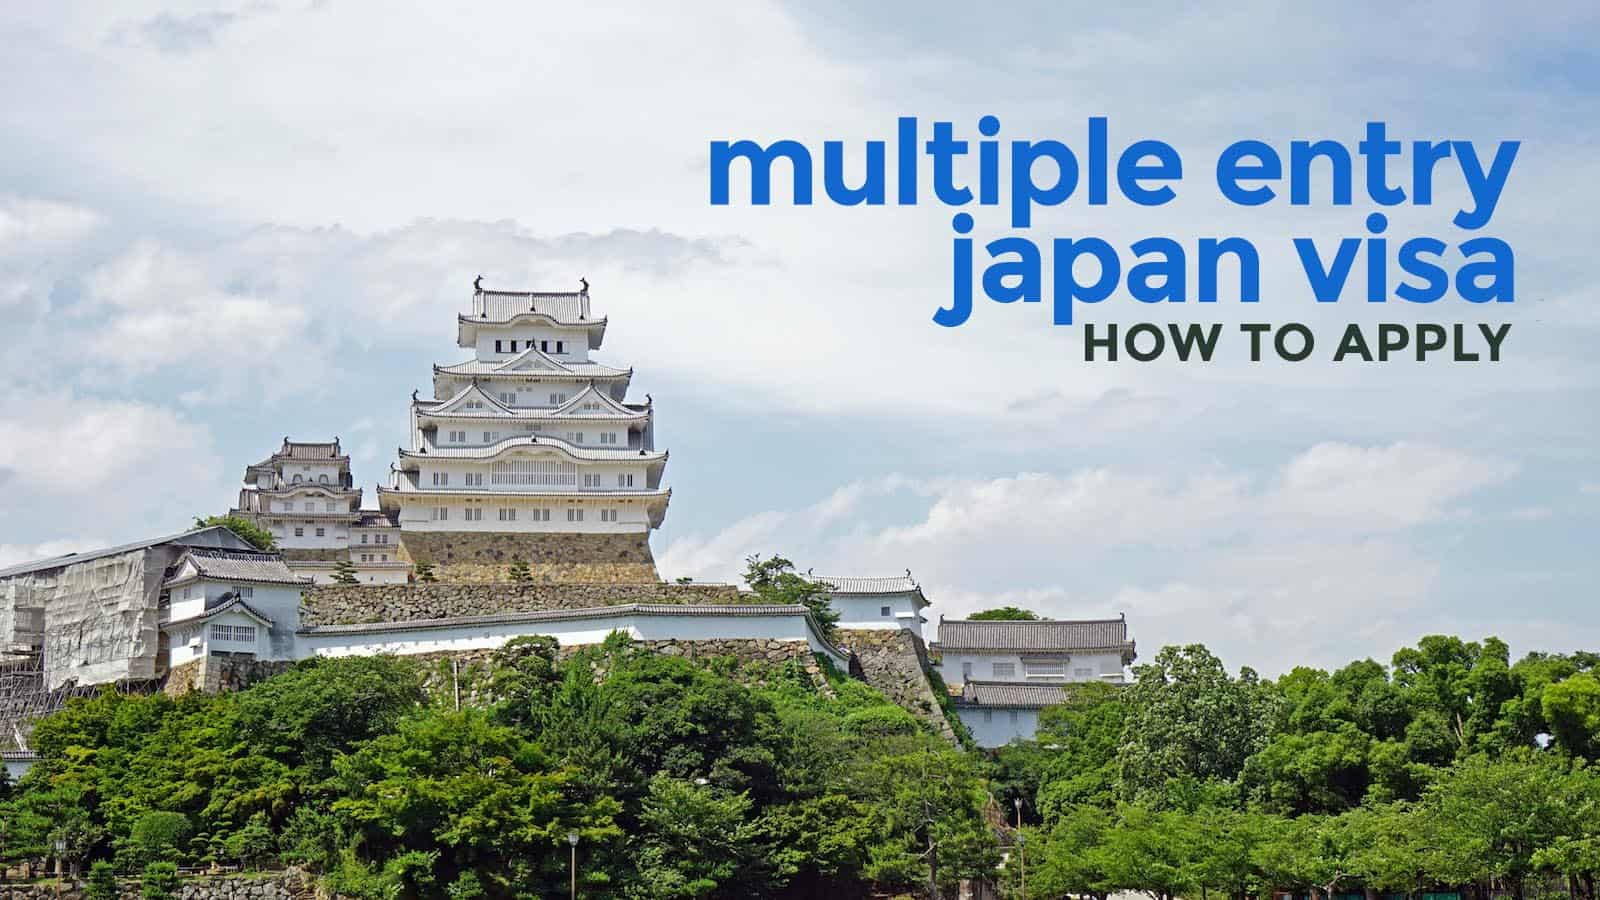 MULTIPLE ENTRY JAPAN VISA: Requirements & How to Apply